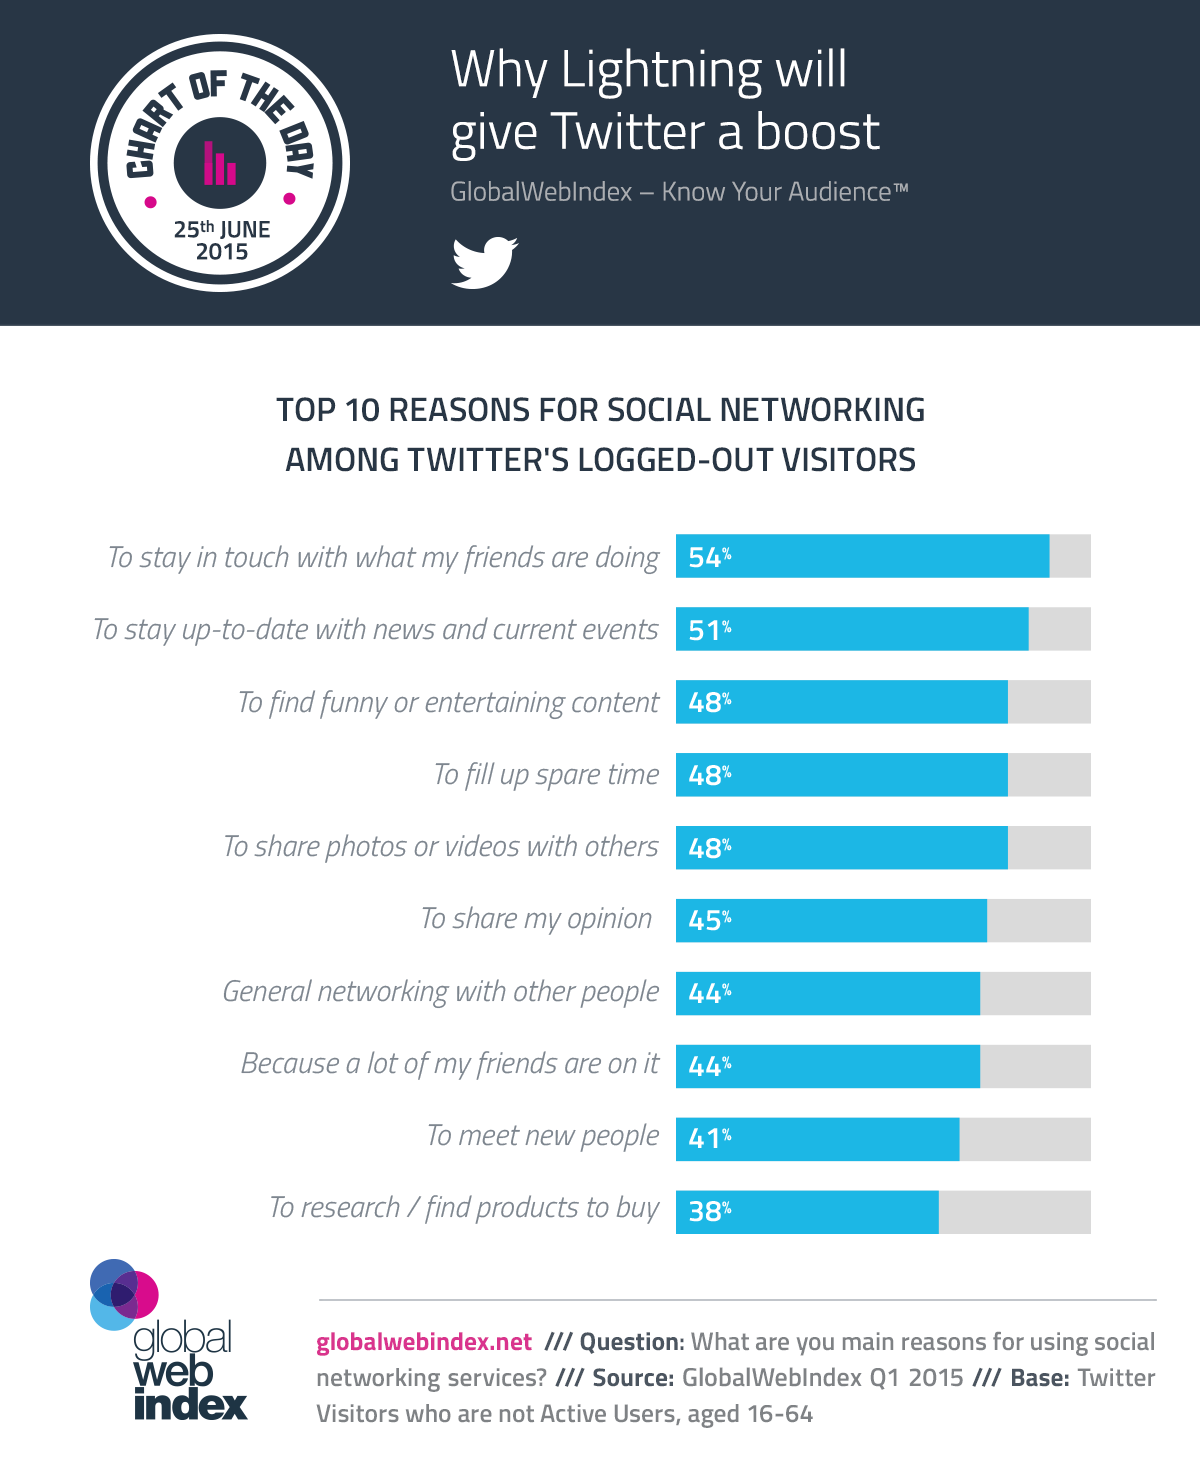 Why Lightning Will Give Twitter a Boost #infographic